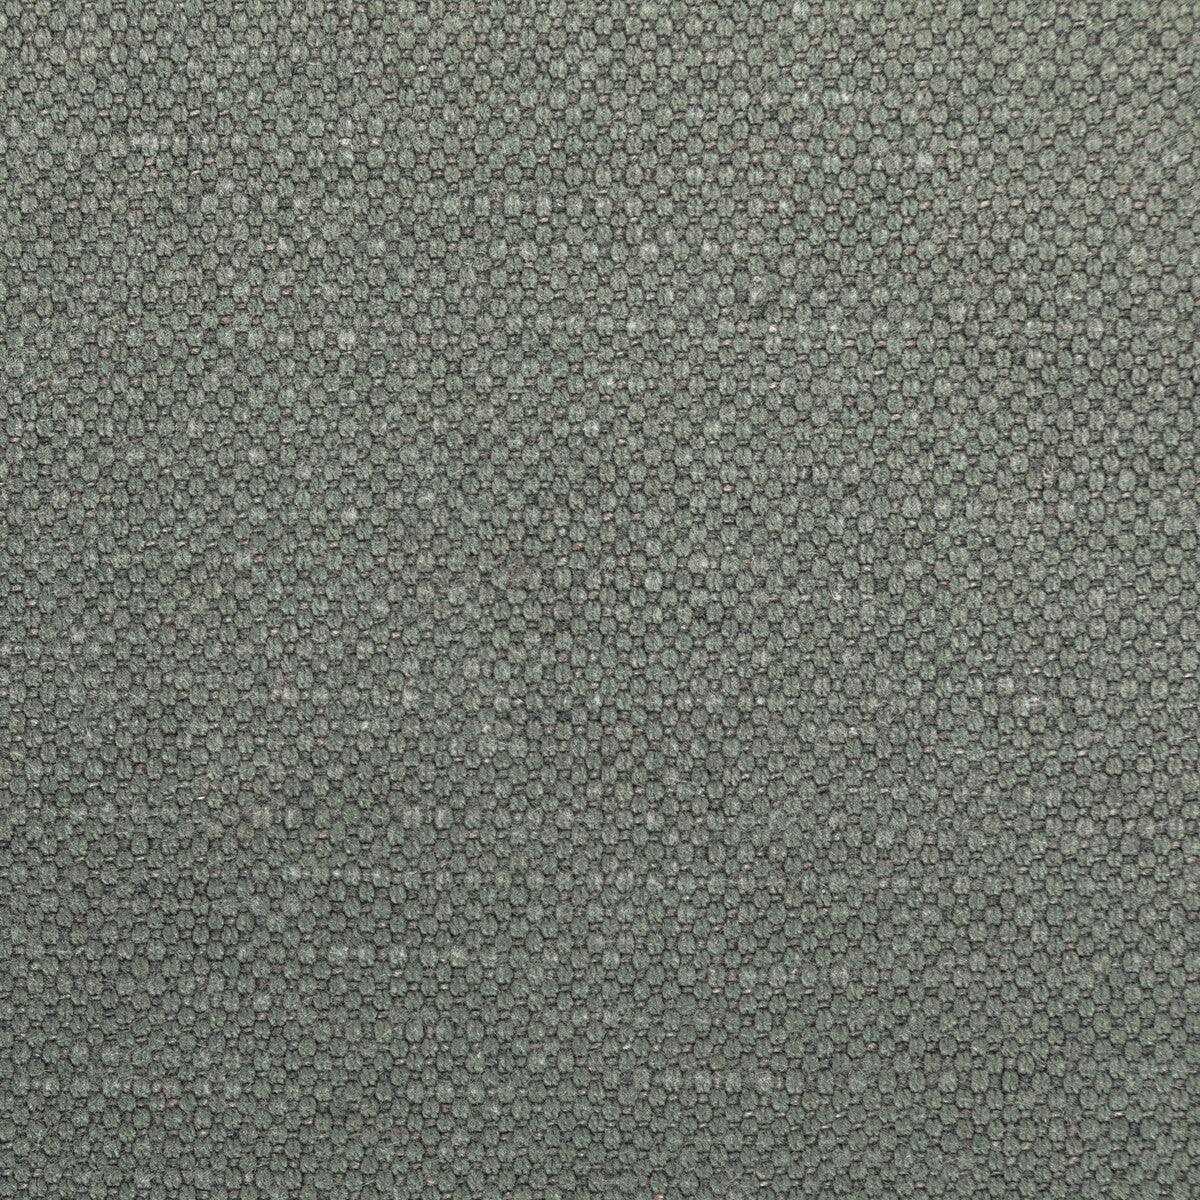 Carson fabric in rhino color - pattern 36282.2111.0 - by Kravet Basics